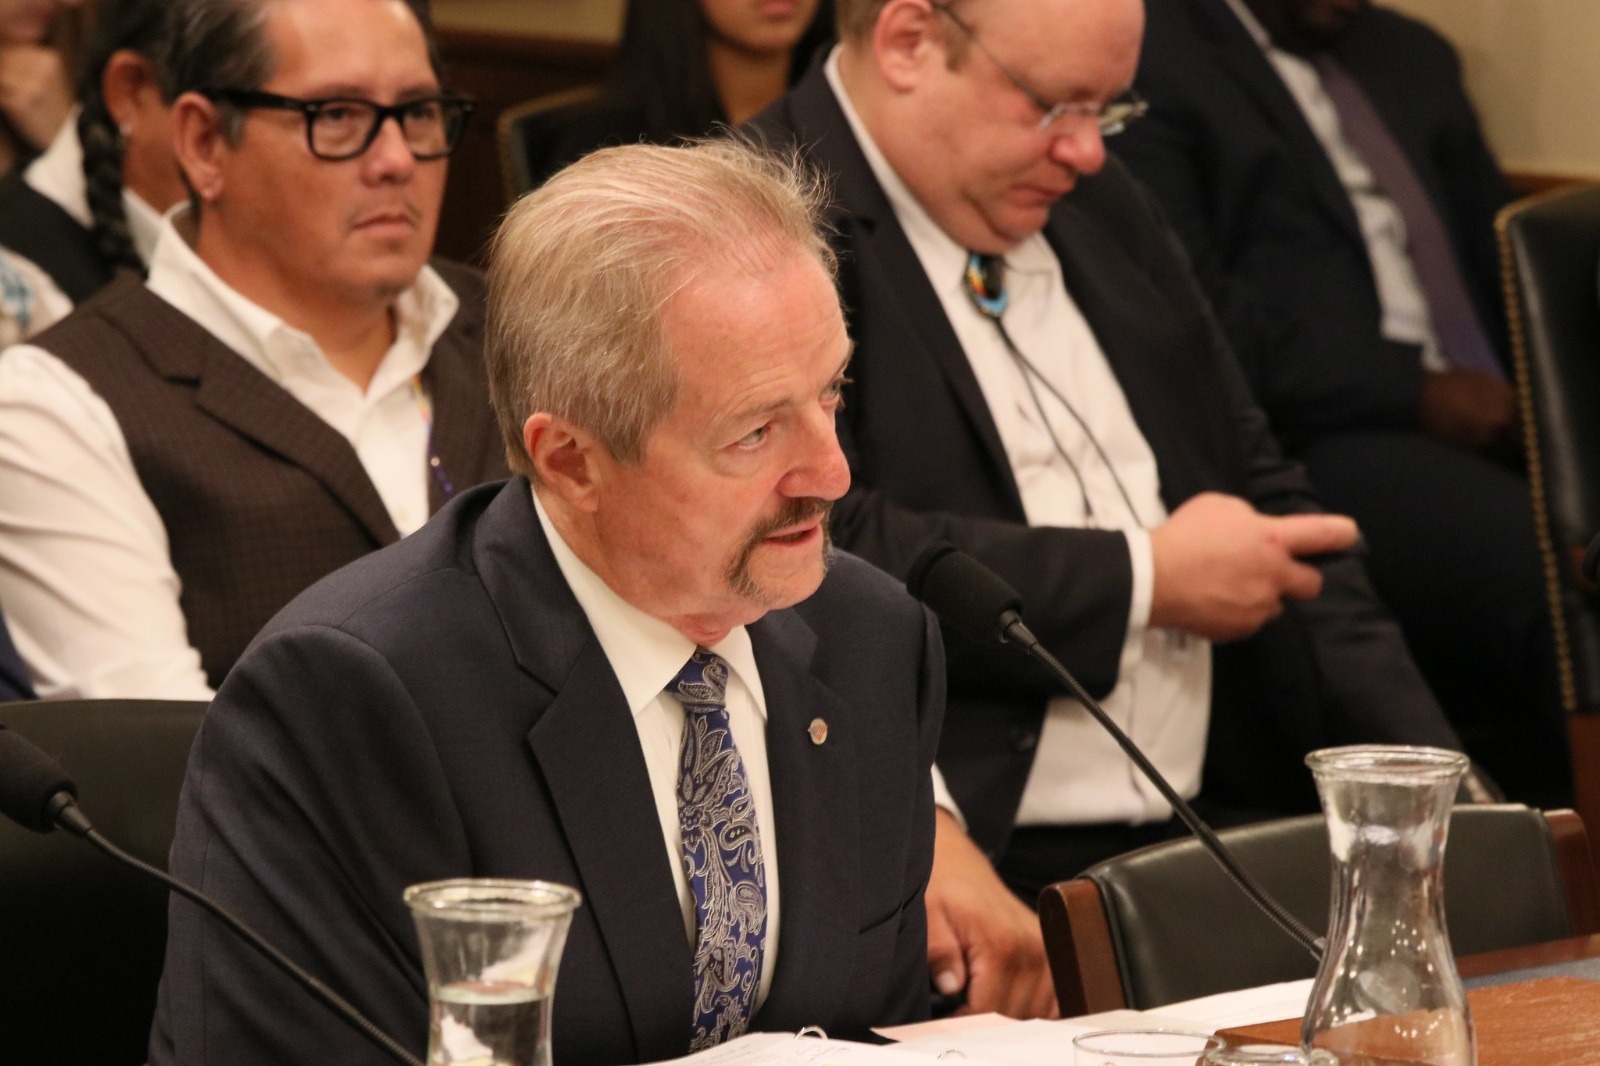 William Pendley Perry testifies before the House Resources Committee on Capitol Hill in 2019.  Pendley never went through the full Senate approval process to confirm his nomination to be permanent director of the Bureau of Land Management. As a result, a federal judge ruled that he could no long lead the agency and that resource decisions made during his tenure as unapproved "acting" director may be null and void. Photo courtesy US House Resources Committee